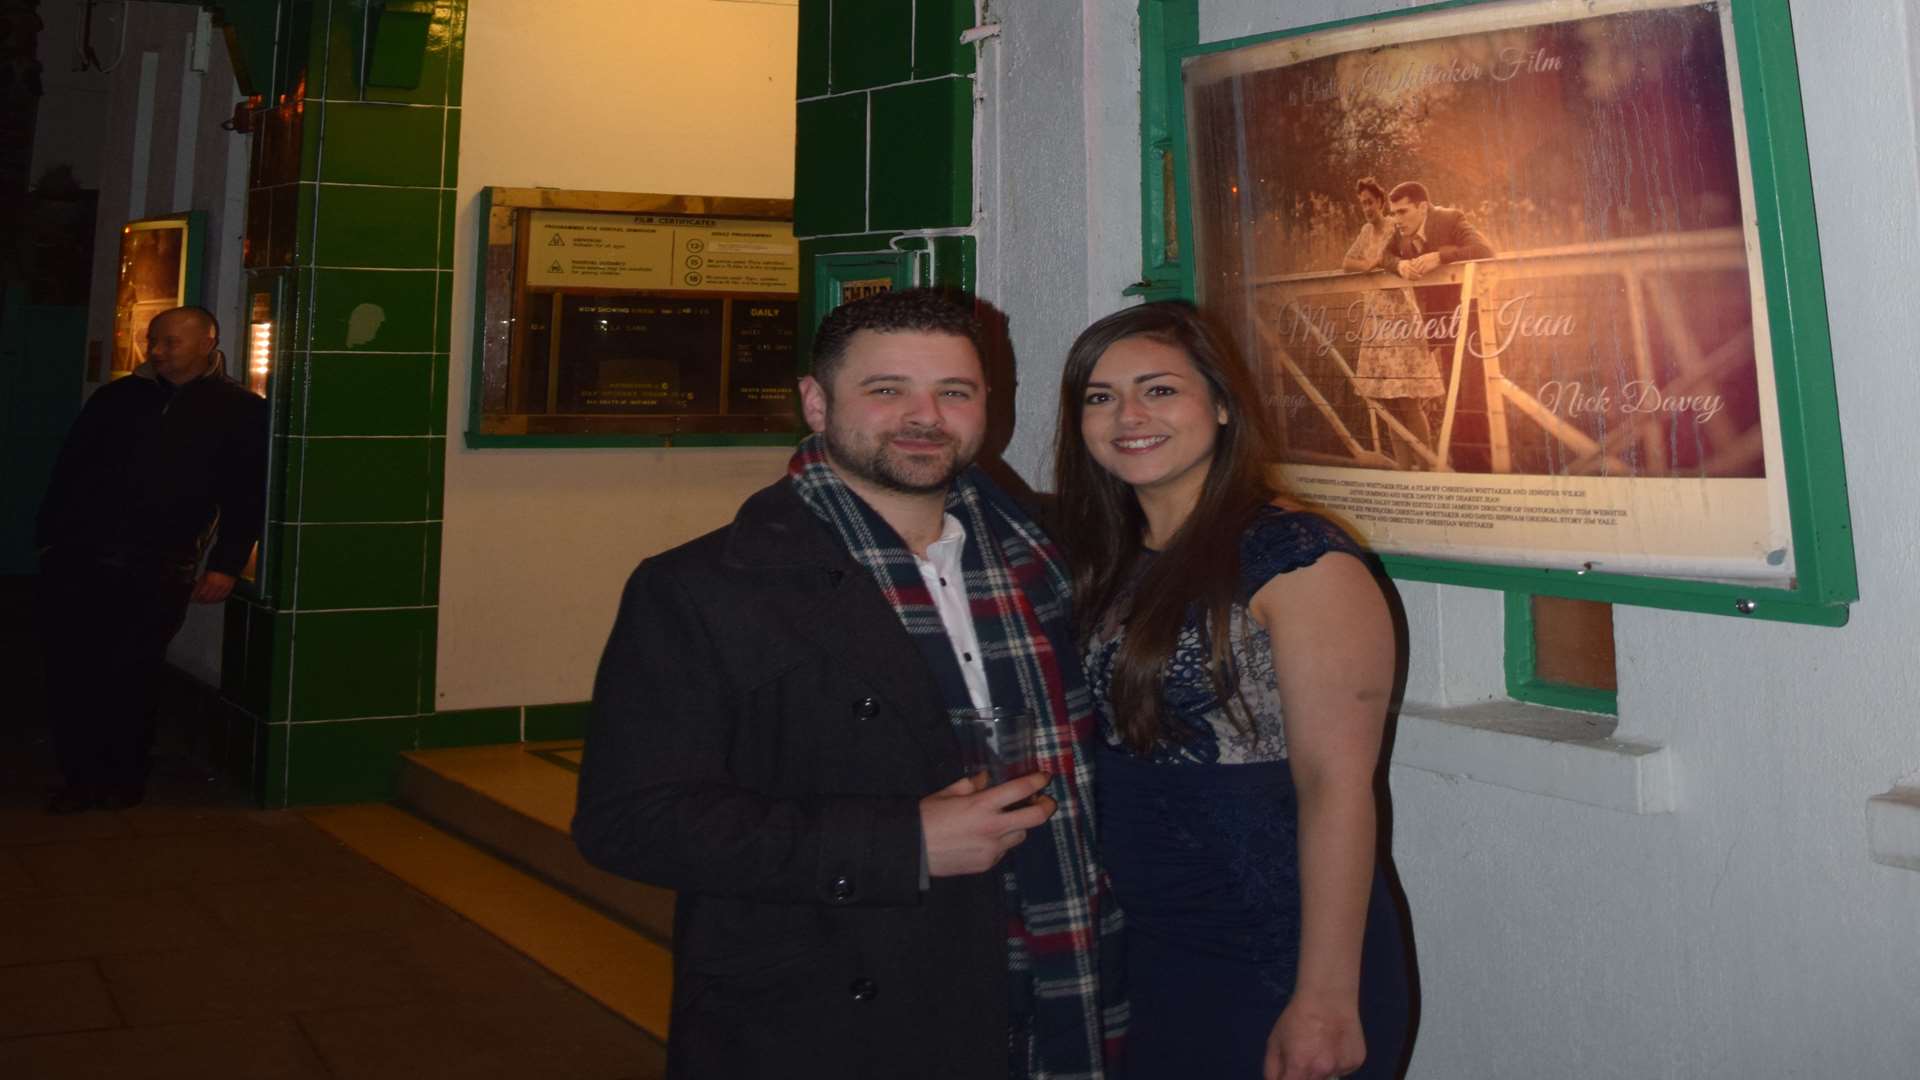 Director Christian Whittaker and actress Jayne Domingo at the screening of My Dearest Jean at The Empire cinema in Sandwich